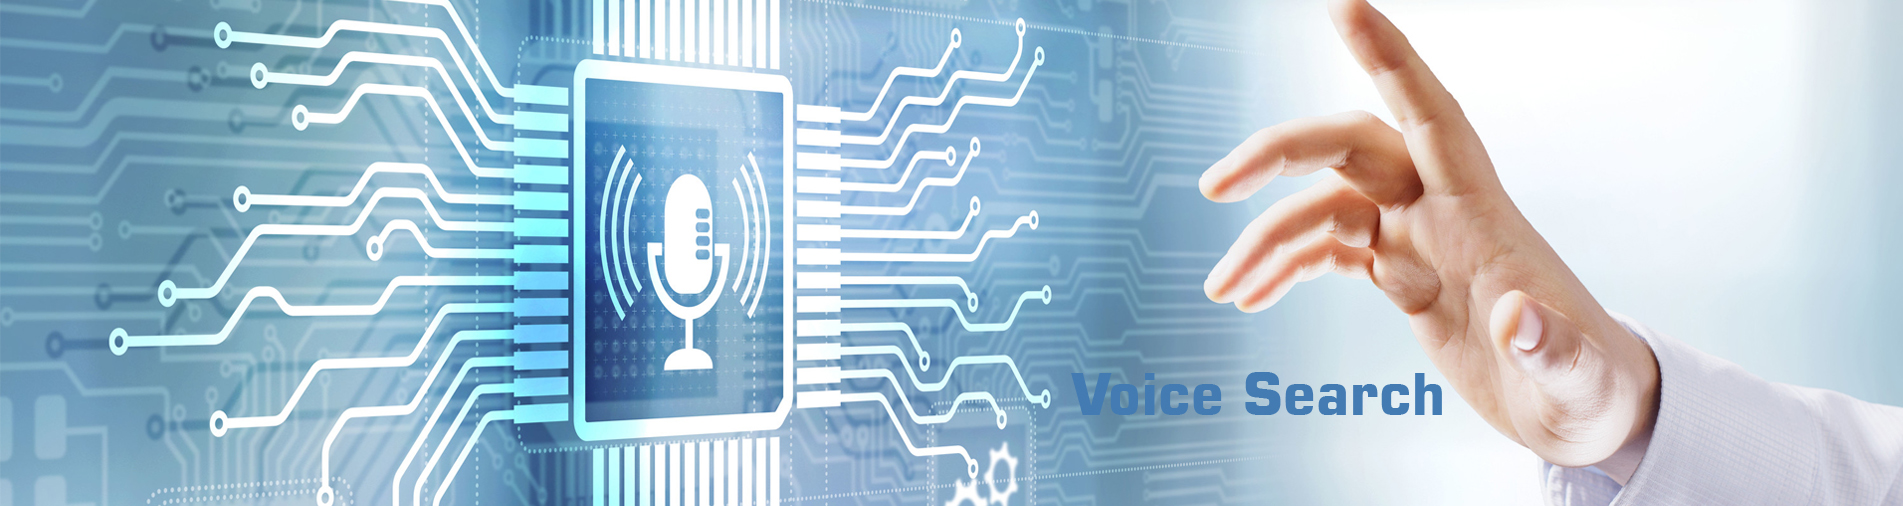 SEO Performance in Voice Search